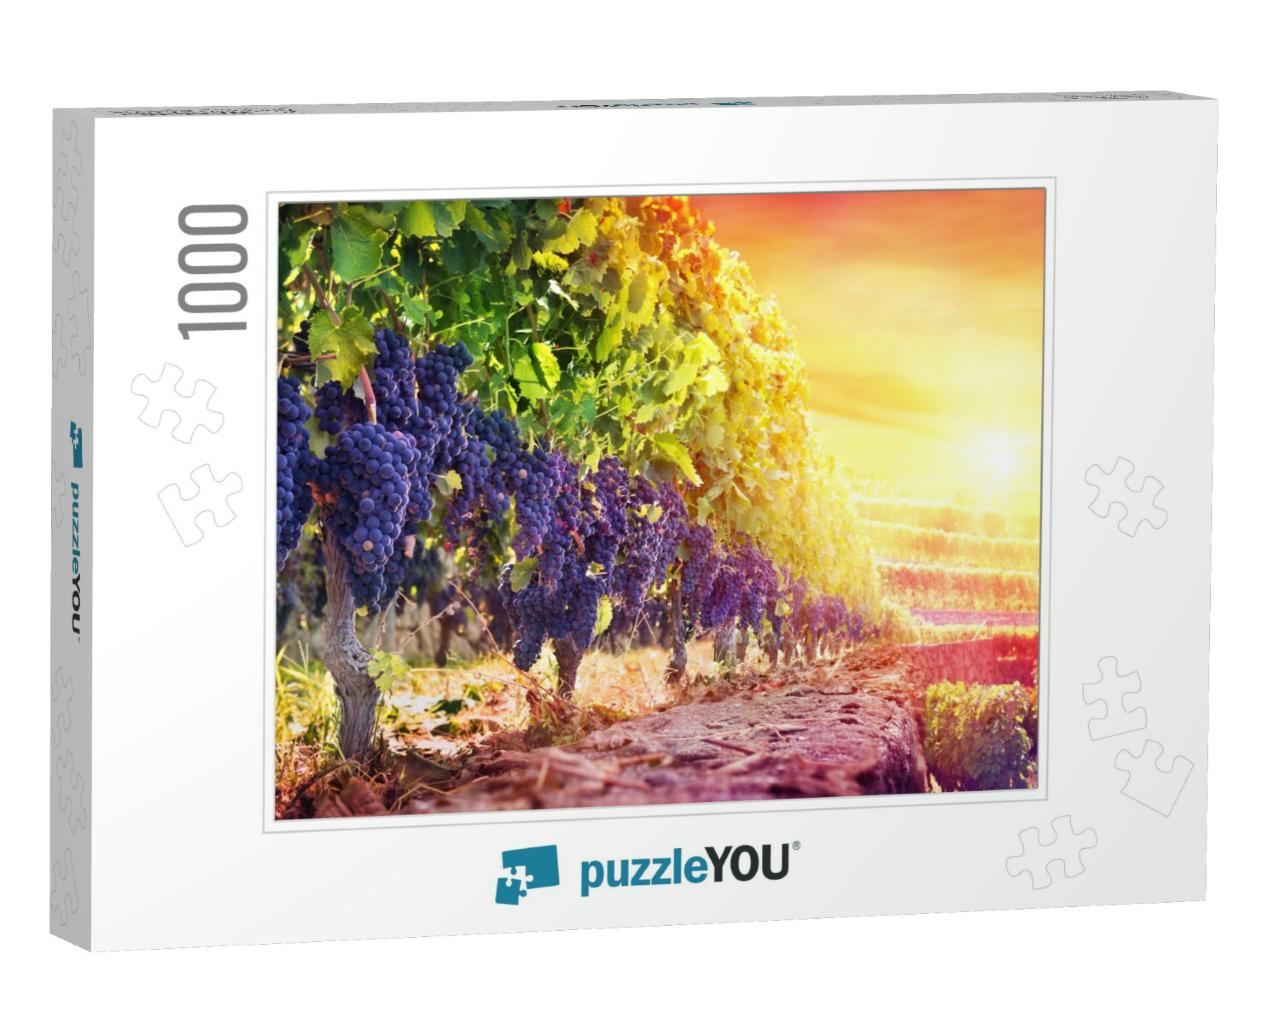 Ripe Grapes in Vineyard At Sunset - Harvest... Jigsaw Puzzle with 1000 pieces